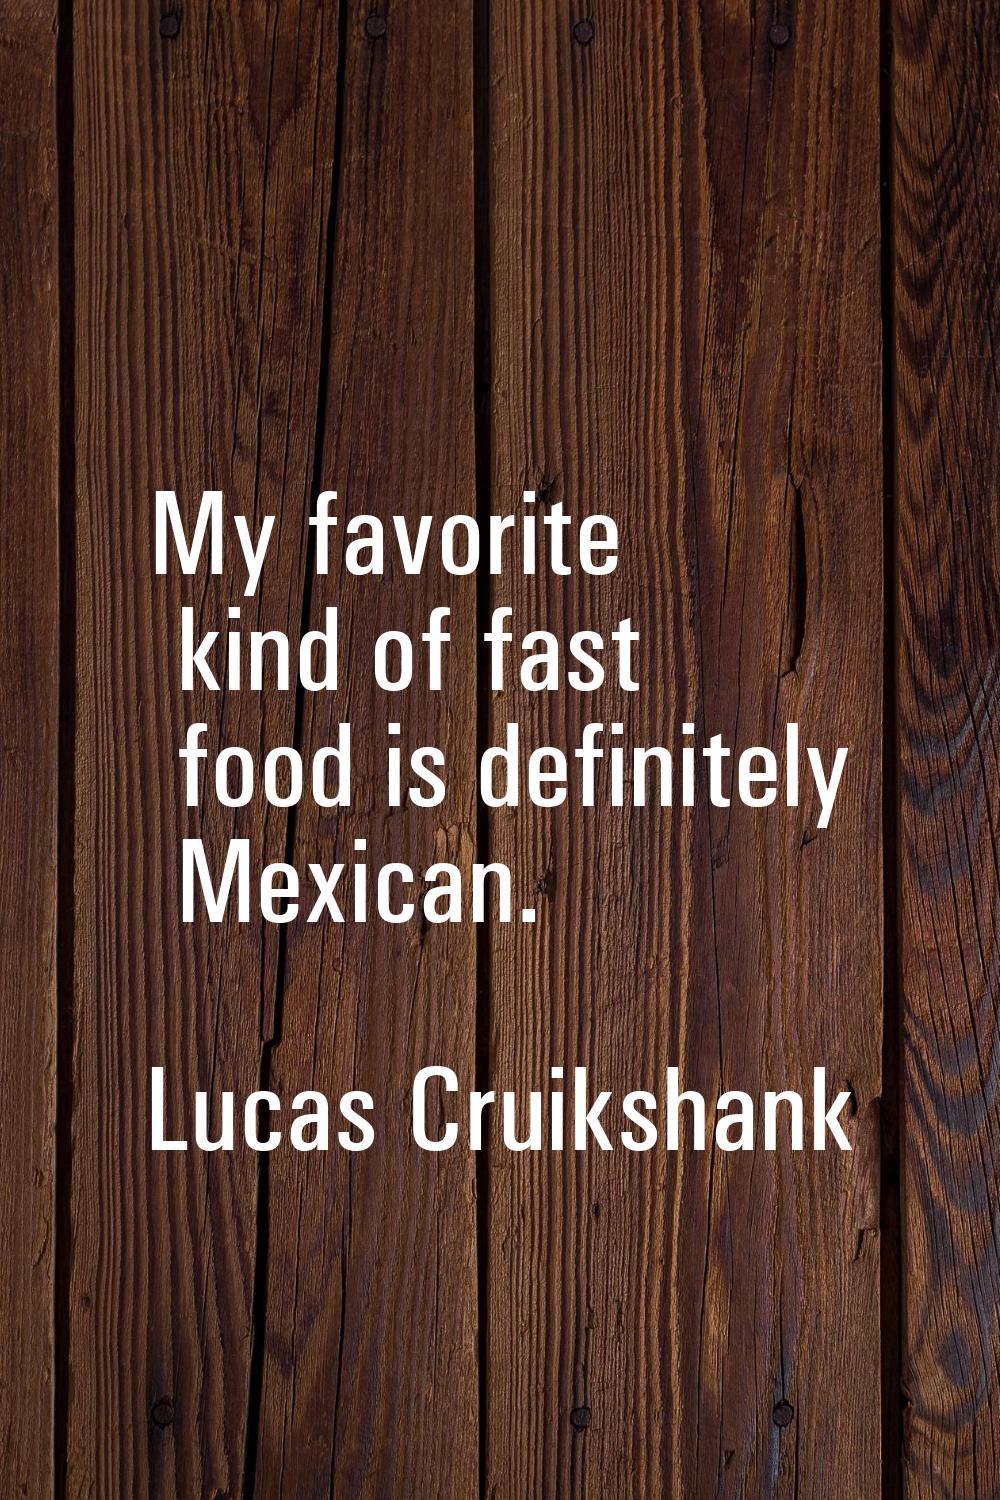 My favorite kind of fast food is definitely Mexican.